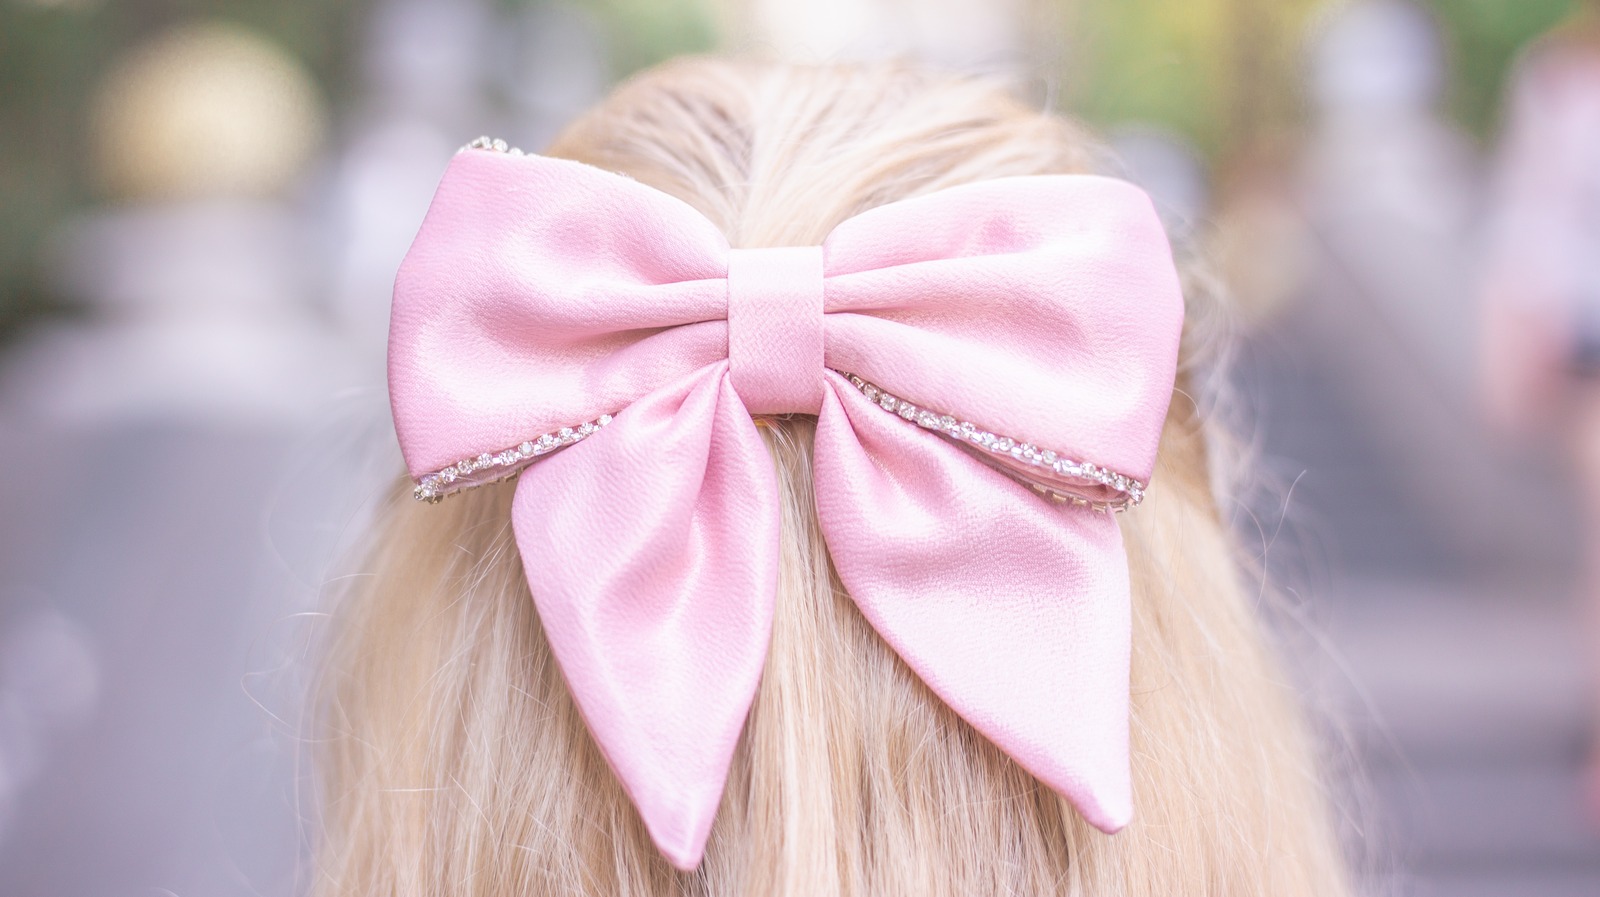 How To Wear A Hair Bow - Feminine Styling